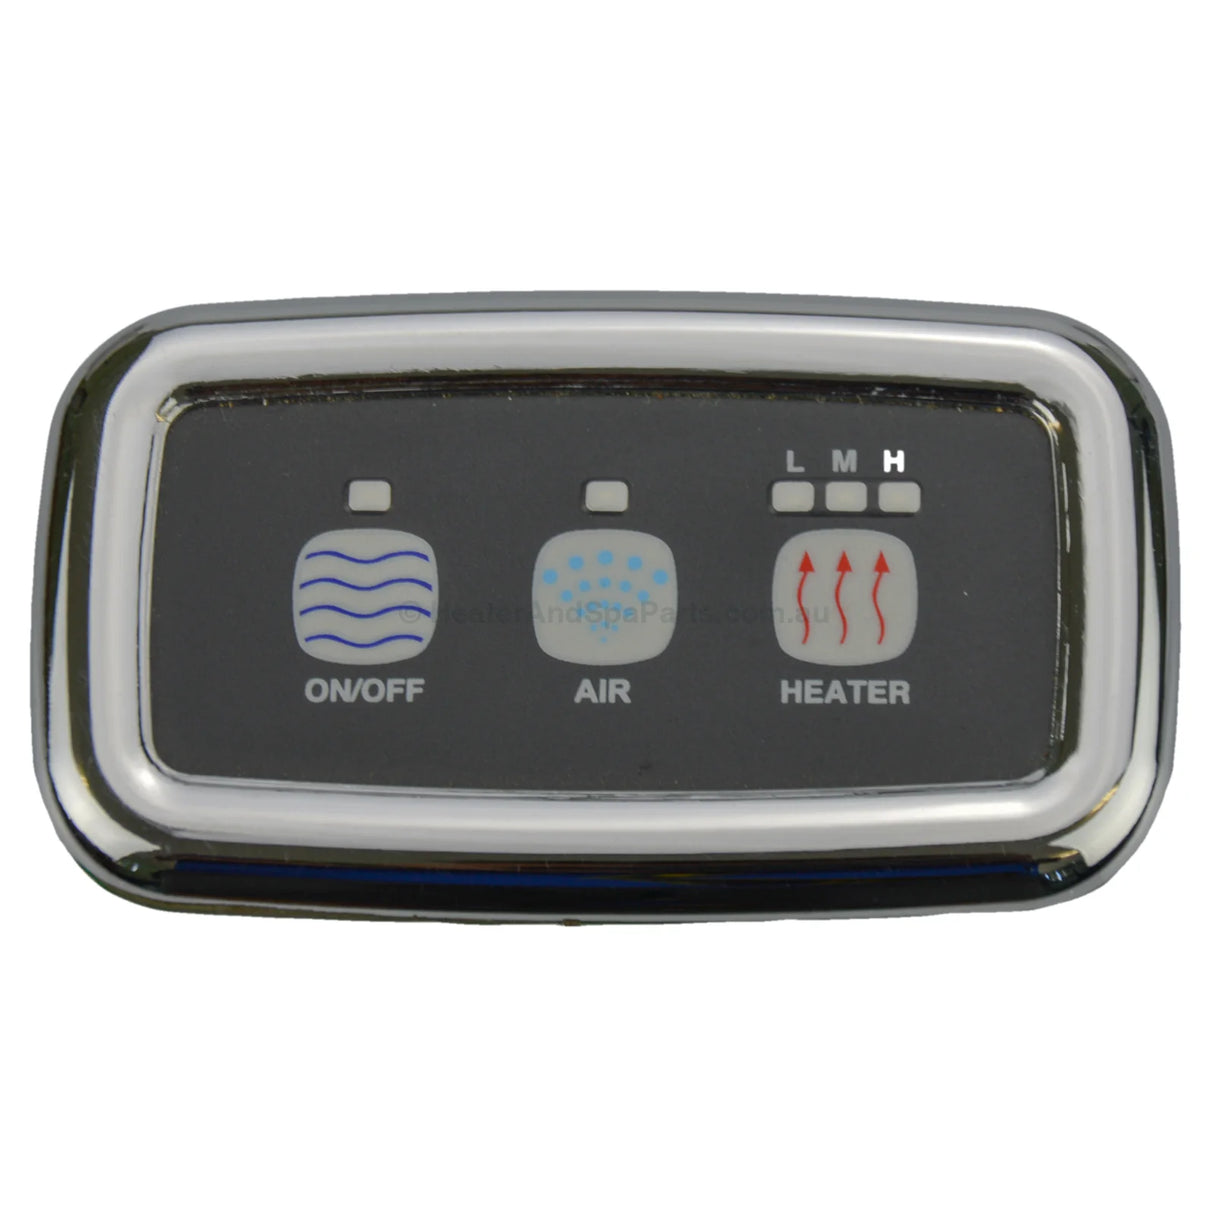 Edgetec Decina 3-Button Sensa Touch Touchpad - Spa Baths - Key Pad Control Panel - Heater and Spa Parts